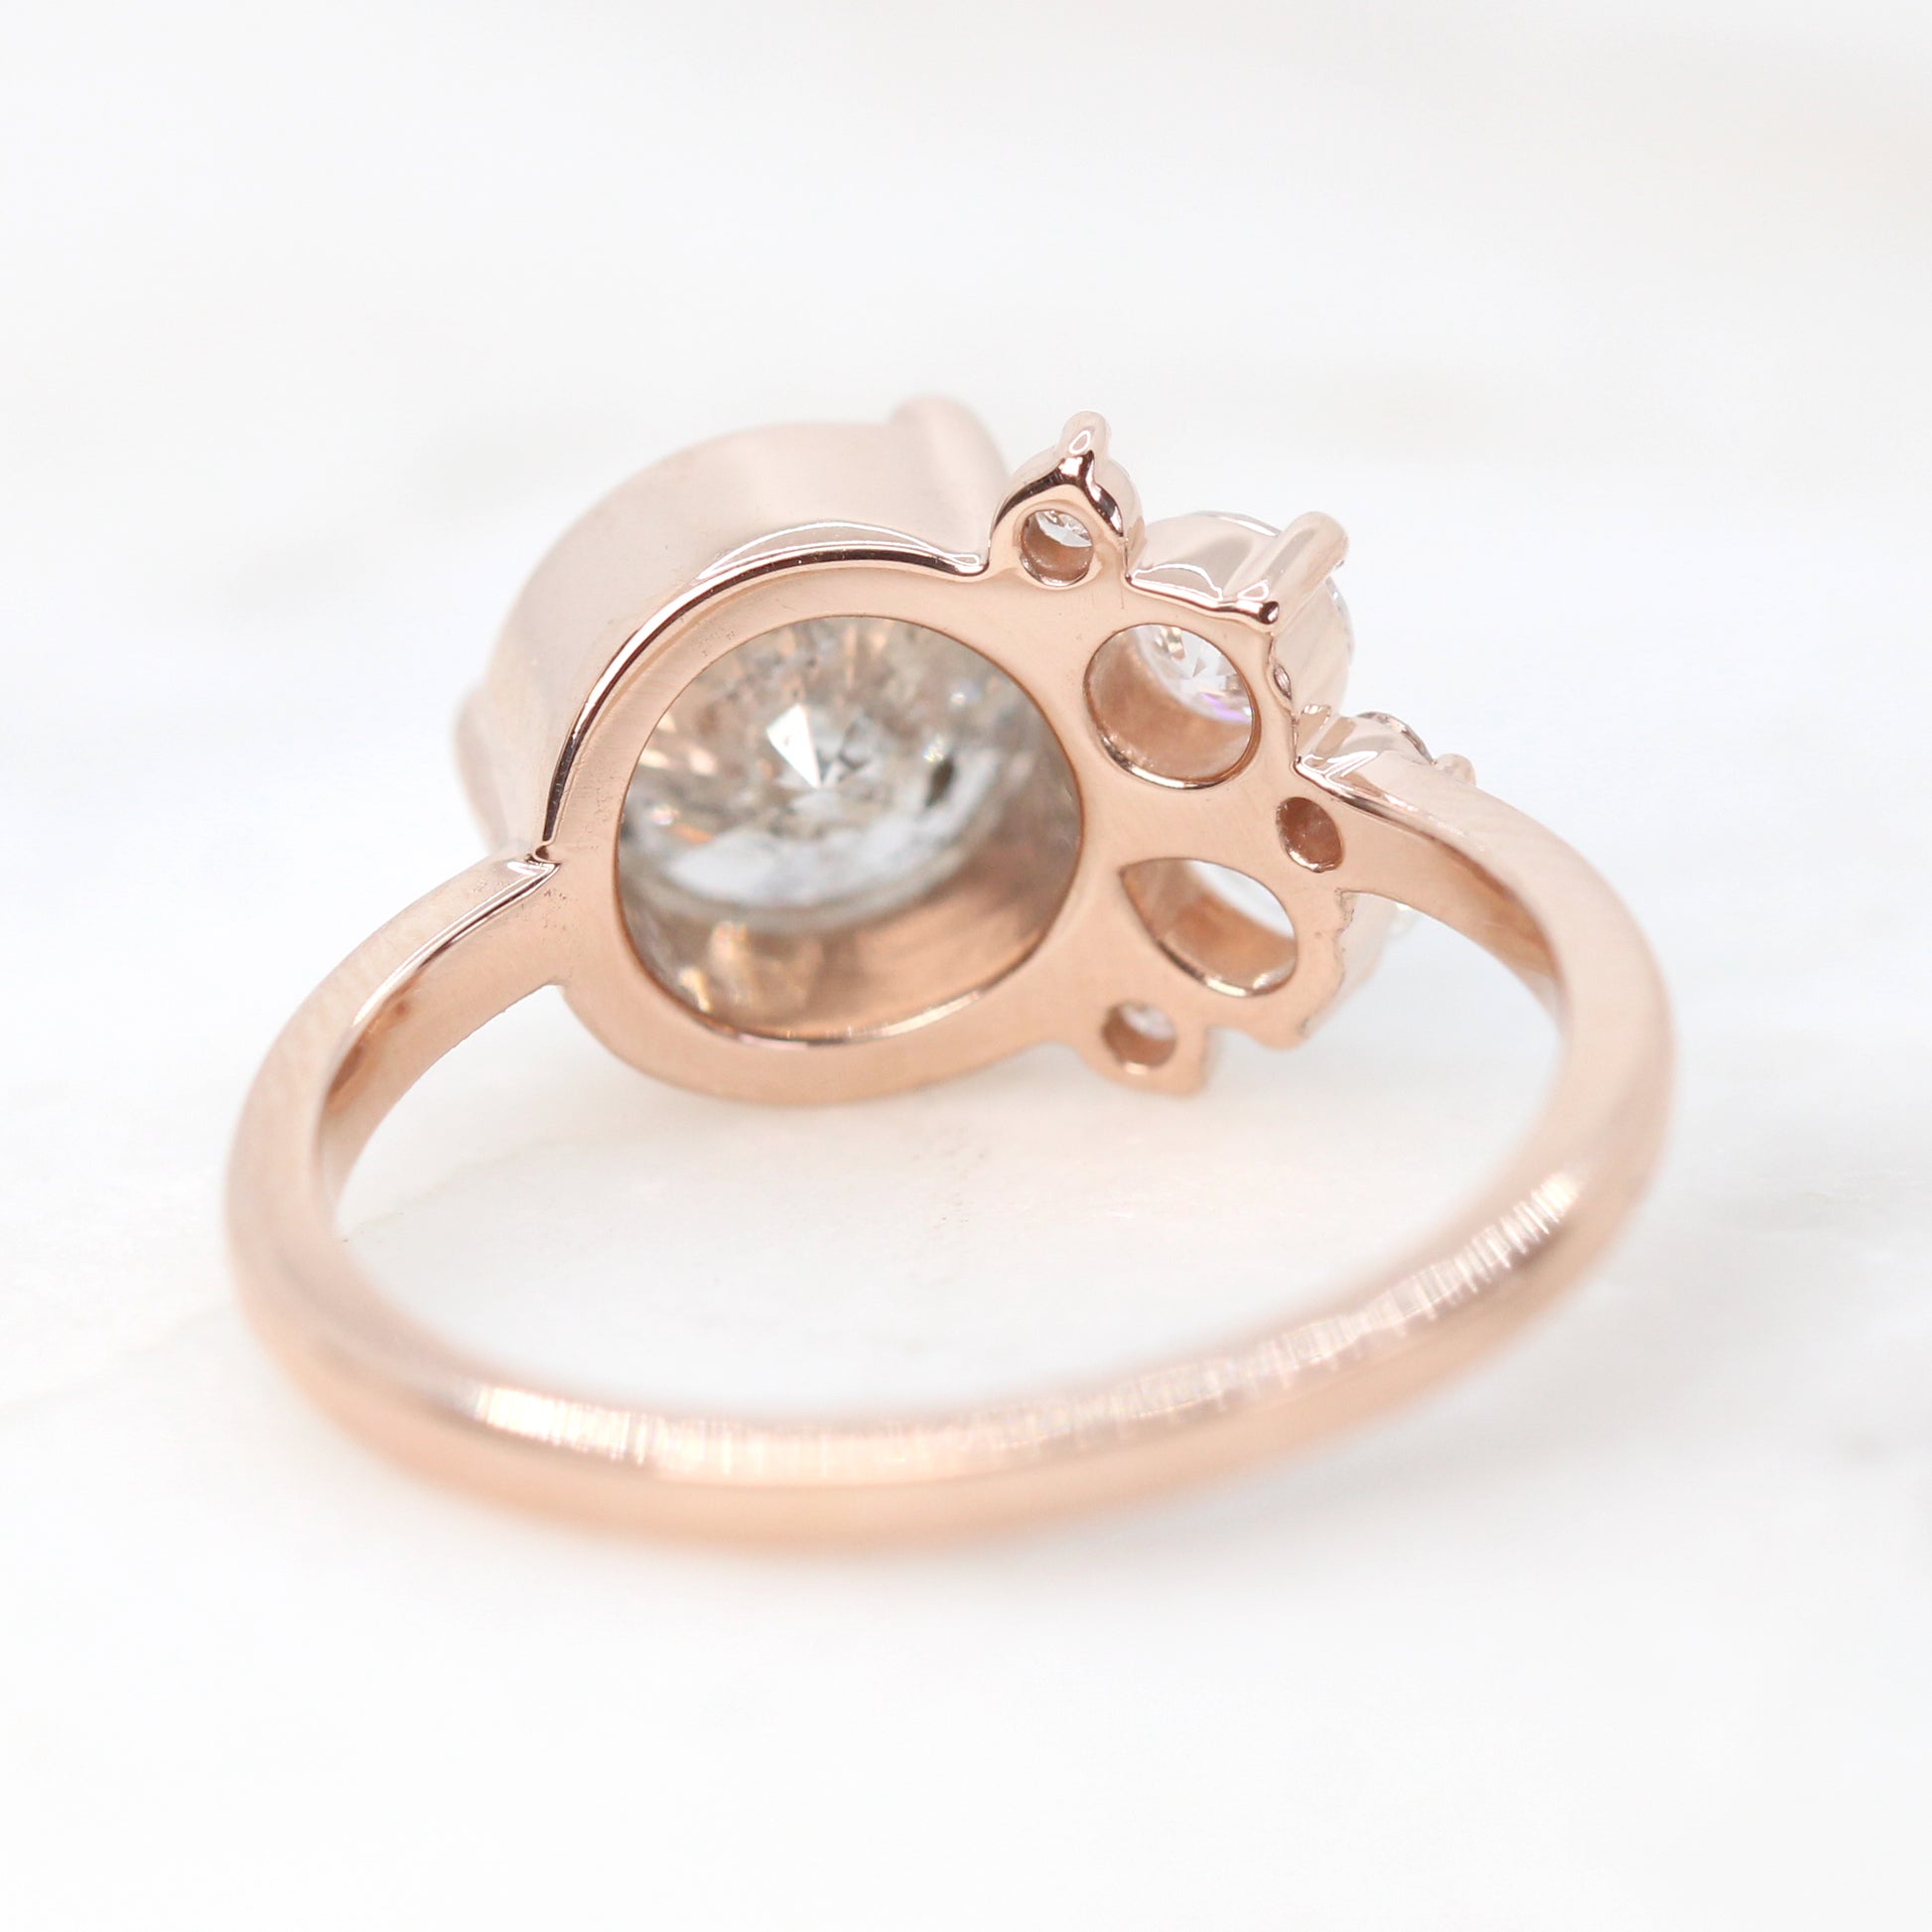 Abetha Ring with a 1.61 Carat Round Gray Celestial Diamond and White Accent Diamonds in 14k Rose Gold - Ready to Size and Ship - Midwinter Co. Alternative Bridal Rings and Modern Fine Jewelry